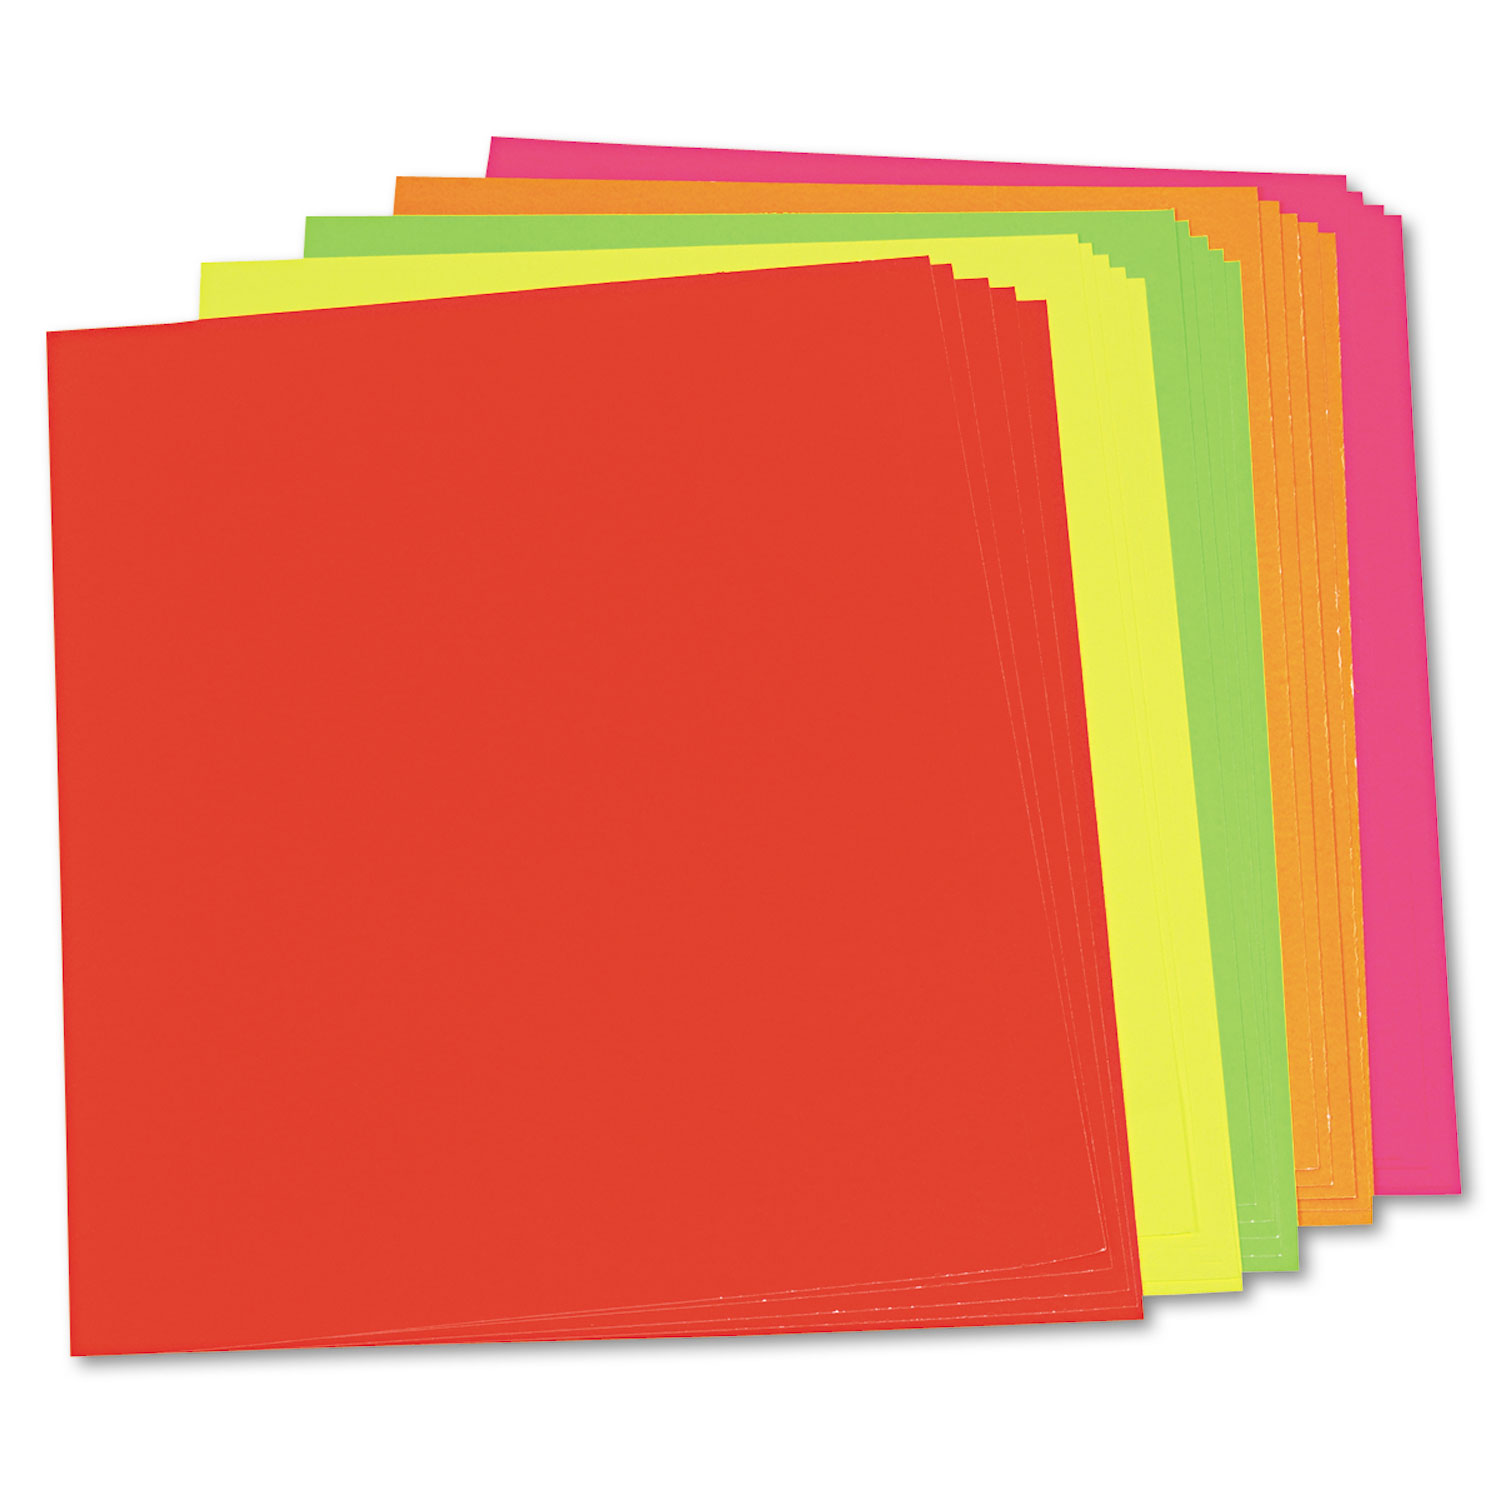 NEON PAPER RED